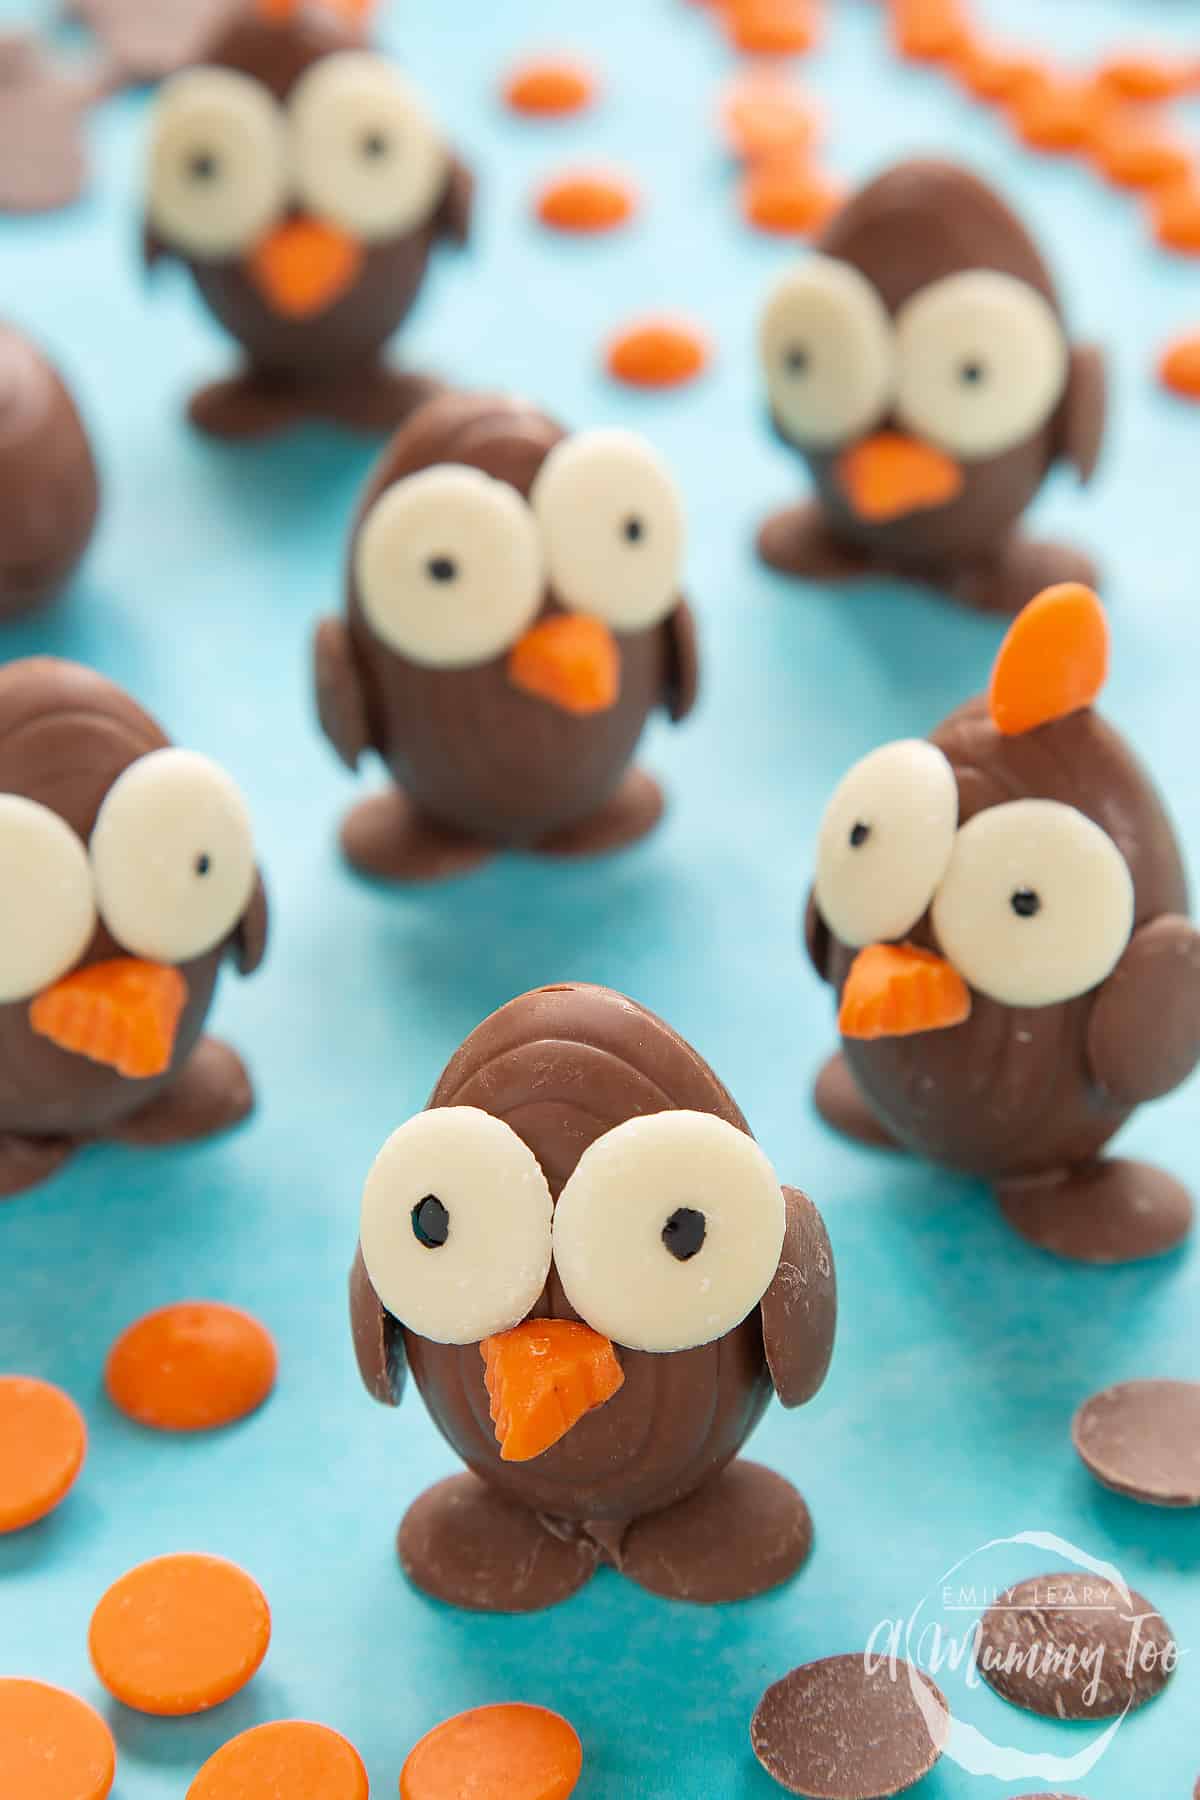 Chocolate chicks made from creme eggs and chocolate buttons, standing on a blue background, surrounded by milk chocolate buttons, white chocolate buttons and chocolate orange buttons. One of the chicks in the background has an orange crest. 